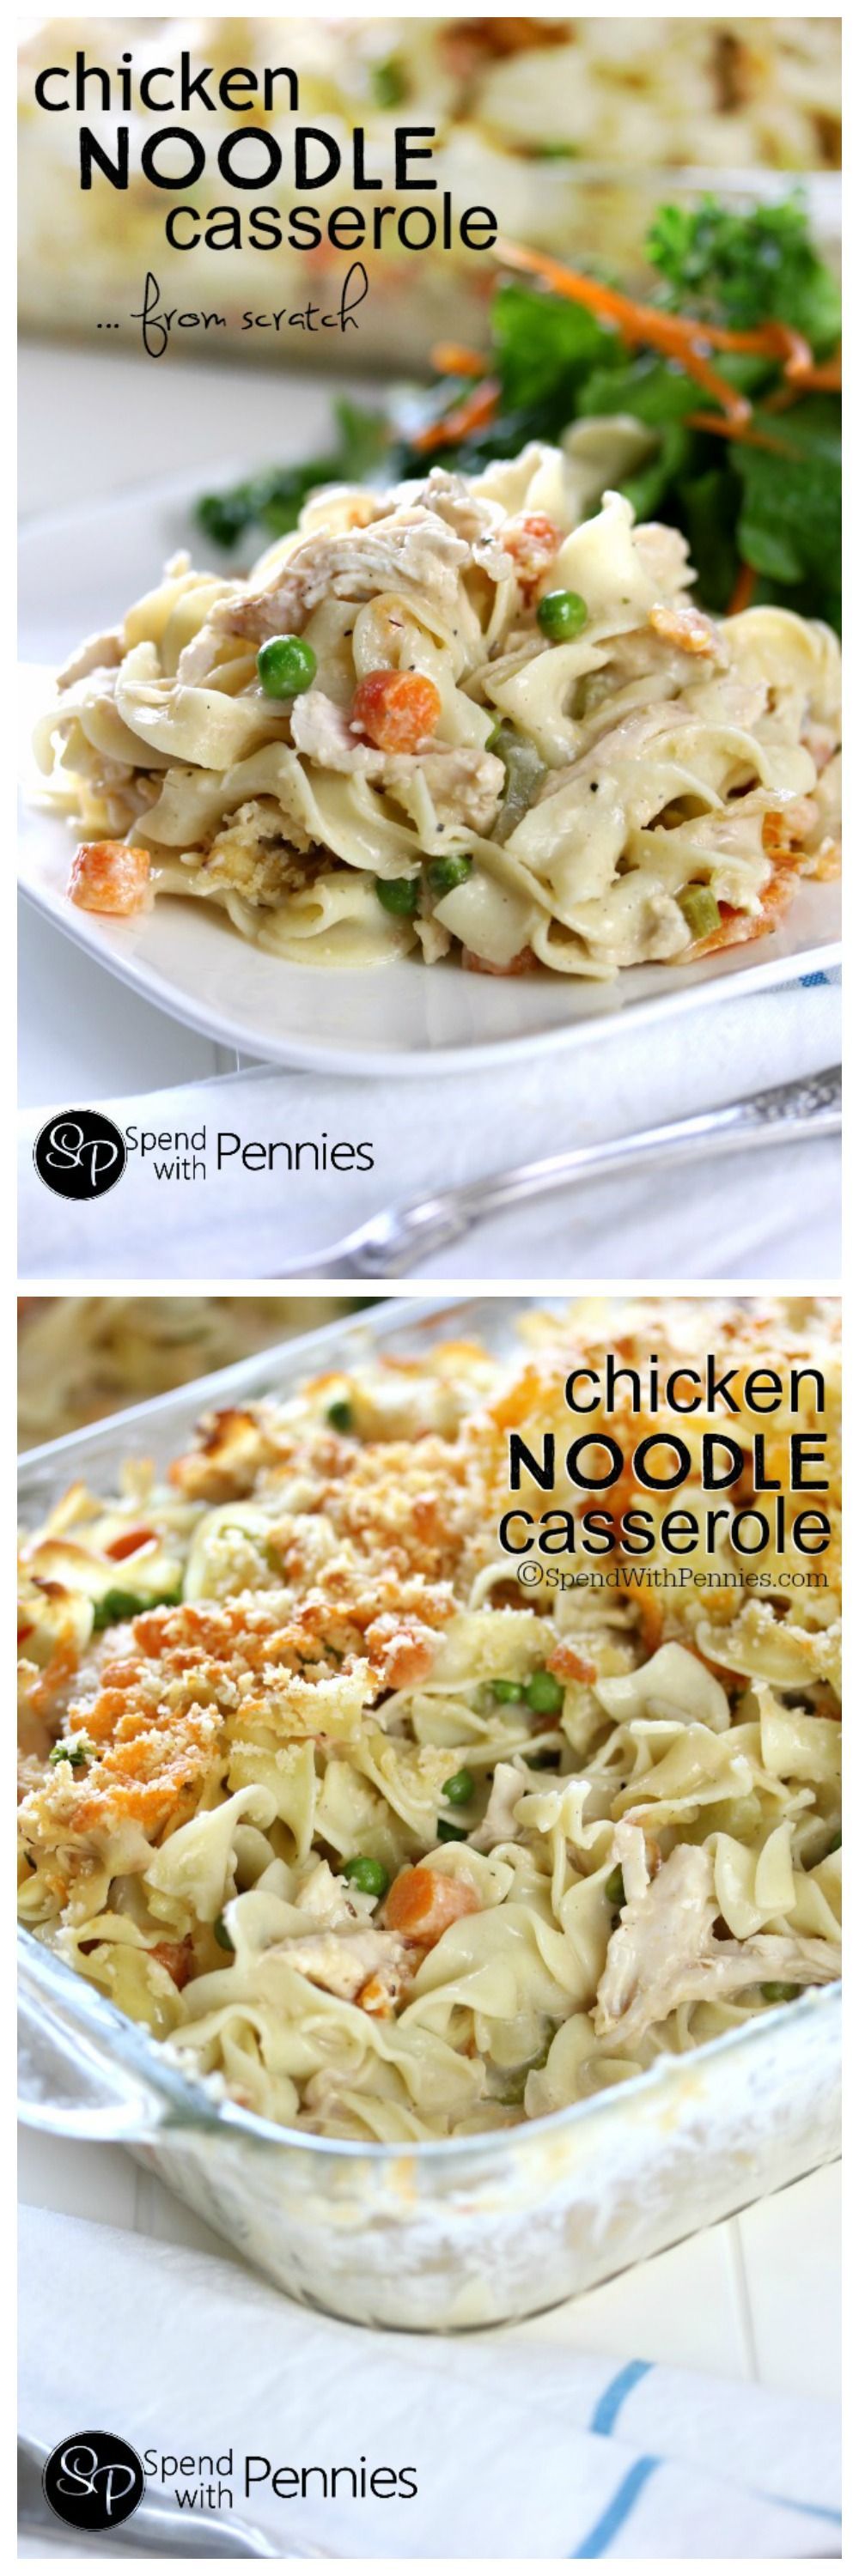 This Creamy Chicken Noodle Casserole is made from scratch! Easy & cheesy it’s quick to make loaded up with veggies (not salt) & it